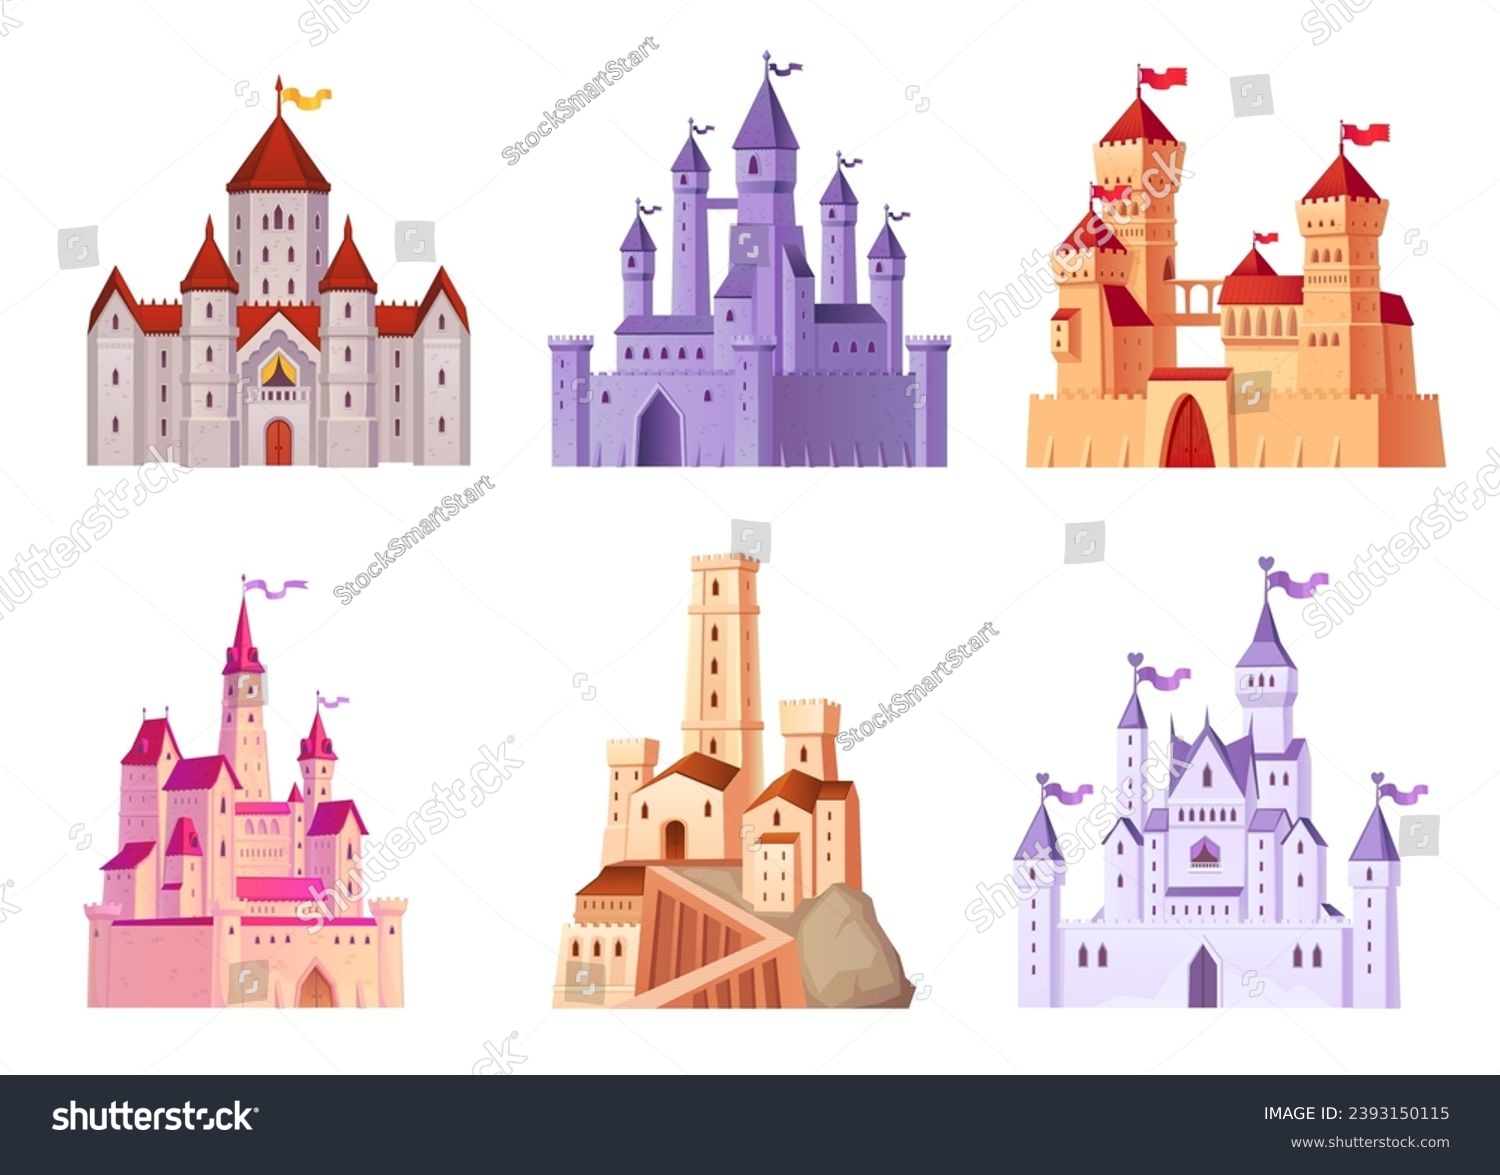 SVG of Cartoon citadels. Ancient castle fortress, historic ruins fairytale kingdom king palace princess tower gothic mansion renaissance architecture chateau ingenious vector illustration svg